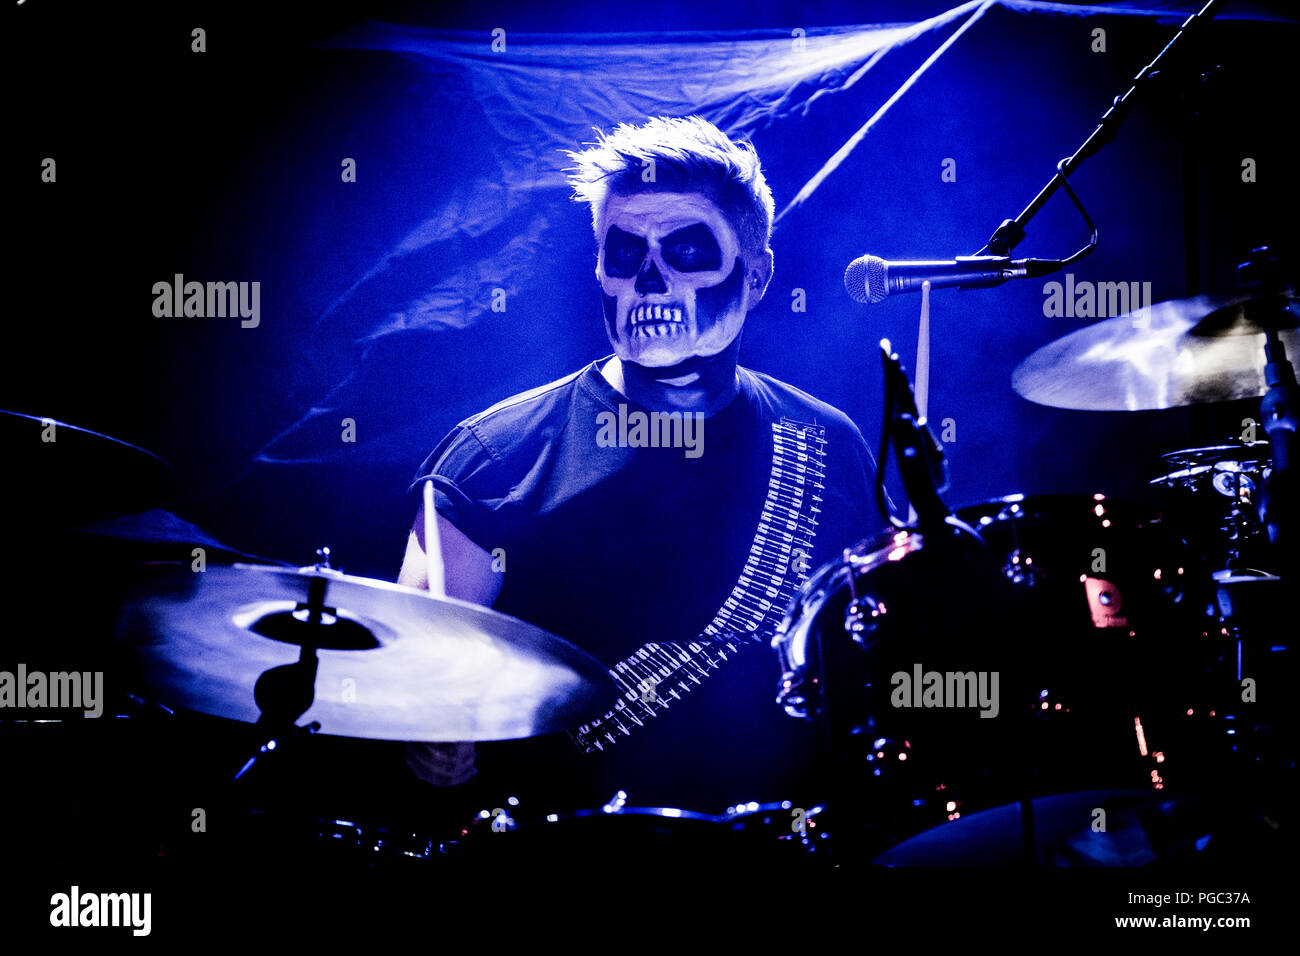 Denmark, Copenhagen - August 20, 2018. The Danish psychobilly, surf punk  band Hola Ghost performs a live concert at VEGA in Copenhagen. Here drummer  Kristian Sandorff is seen live on stage. (Photo